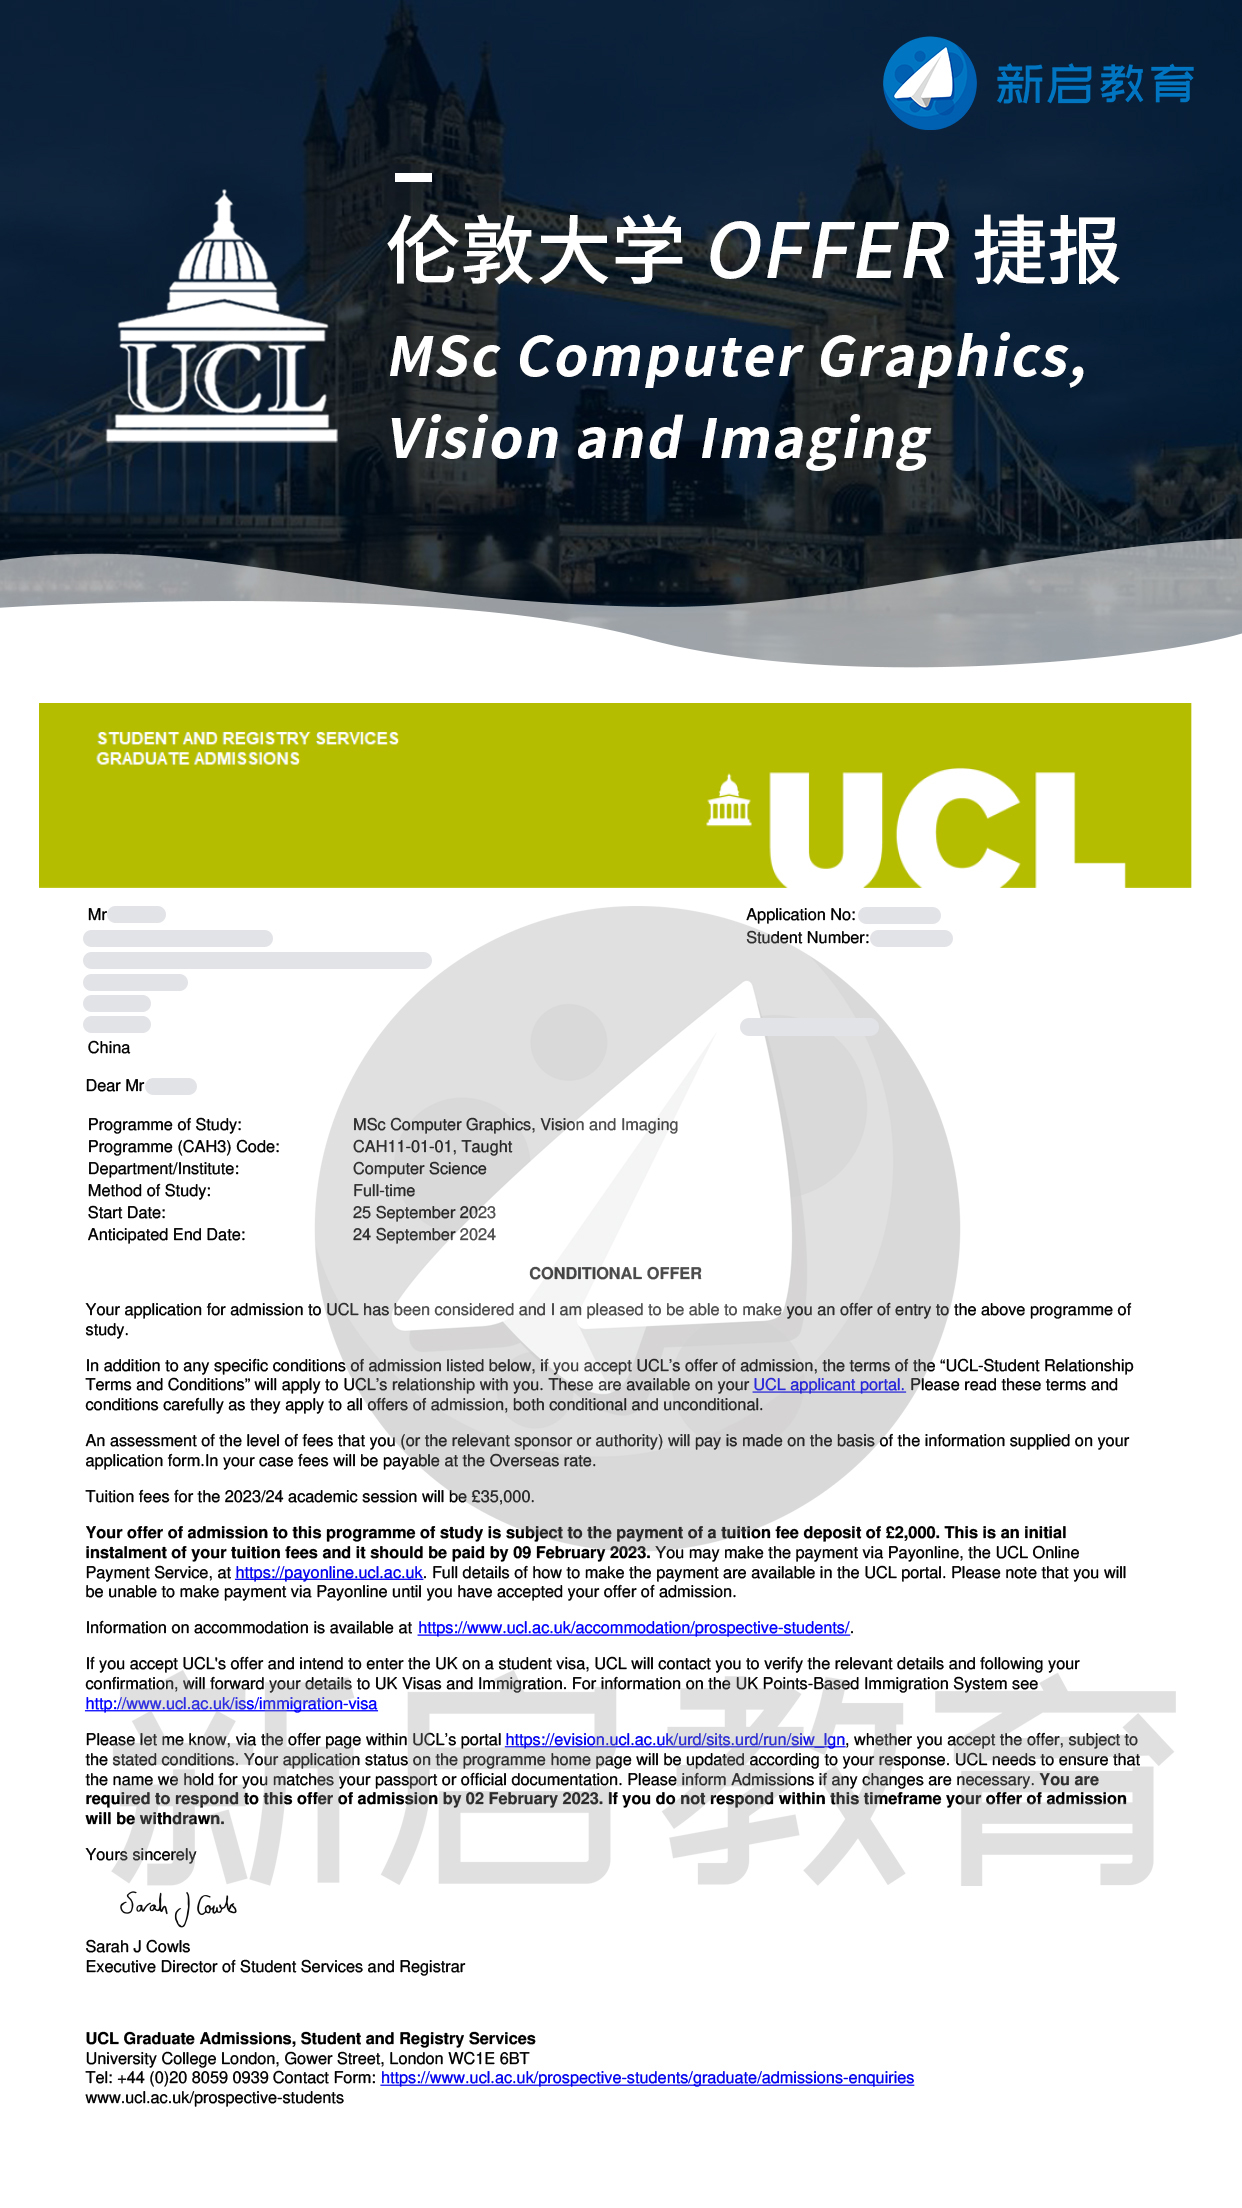 Msc Computer Graphics,Vision and lmaging